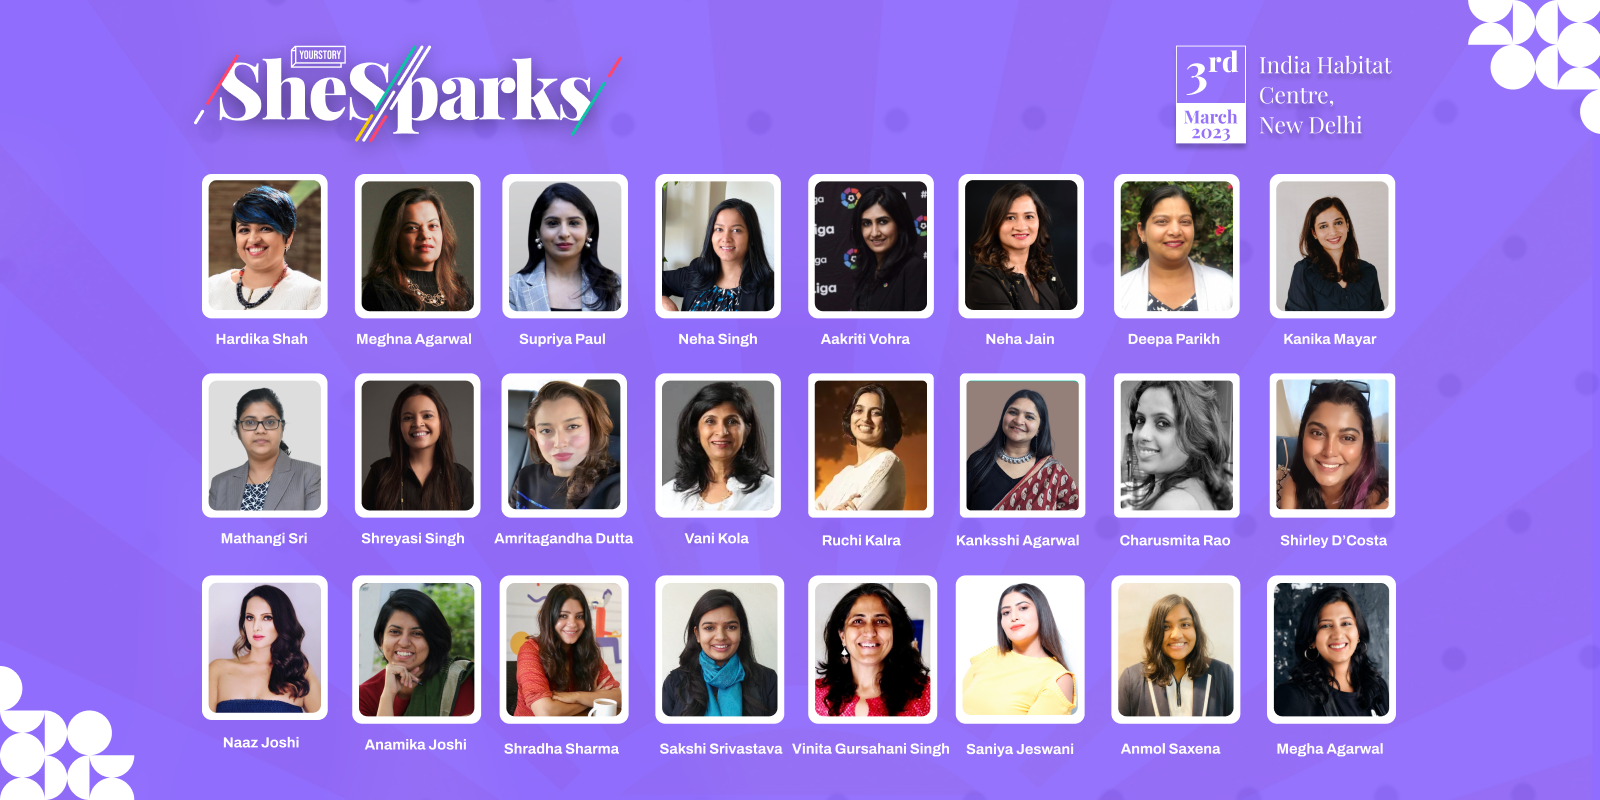 From women in tech to CEOs and founders - Meet India’s top changemakers and leaders at SheSparks 2023

